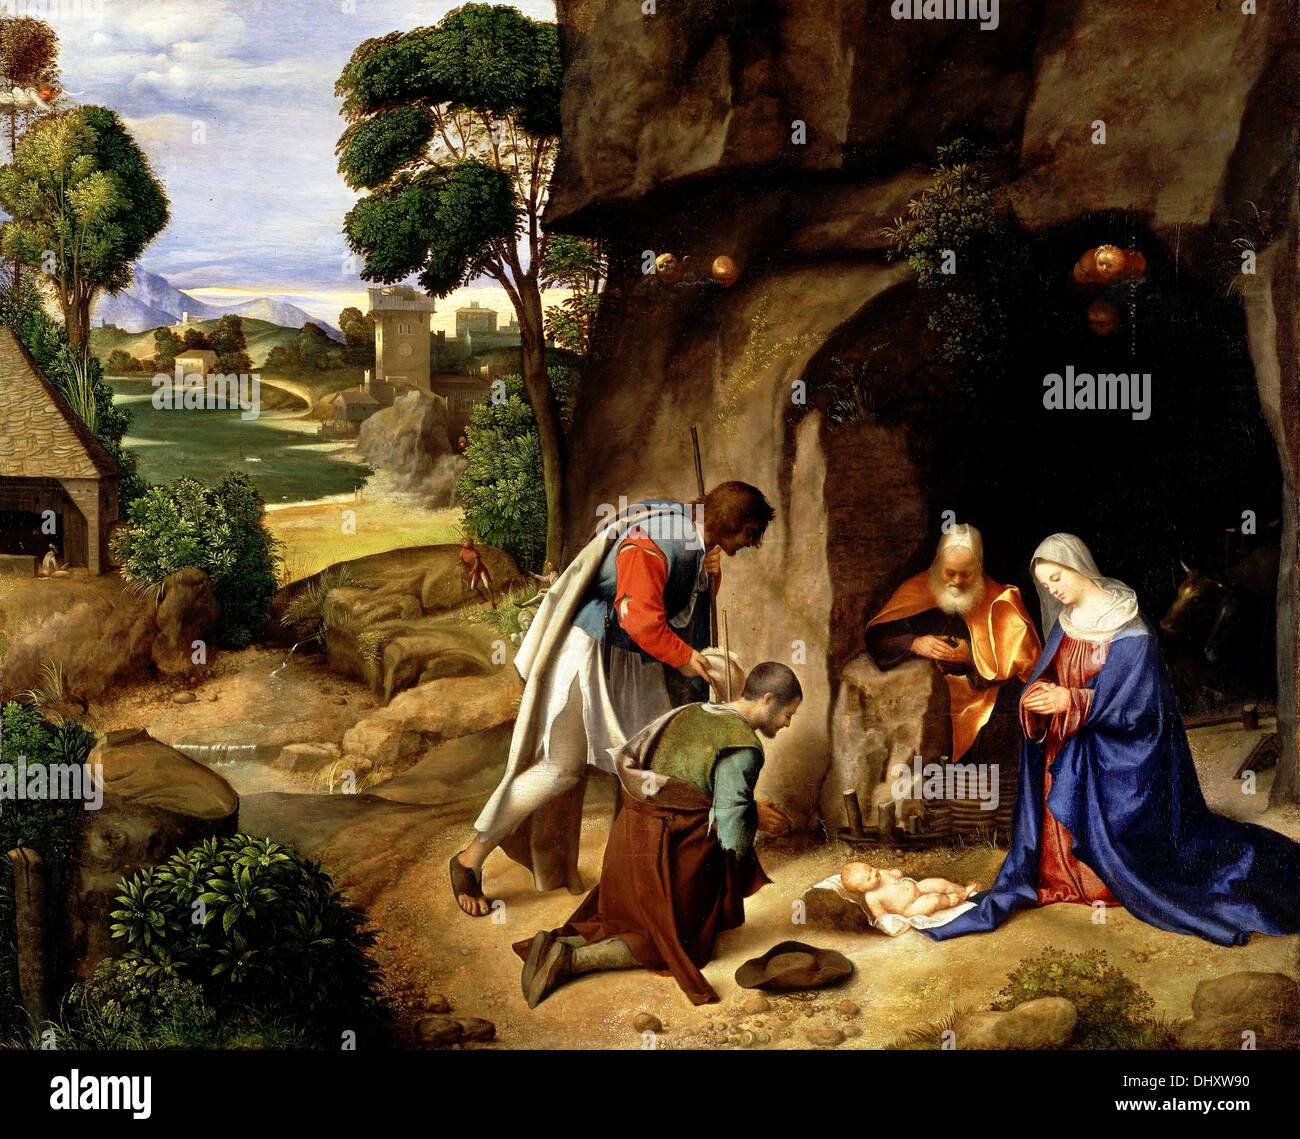 The Adoration of the Shepherds - by Giorgione, 1500 Stock Photo - Alamy